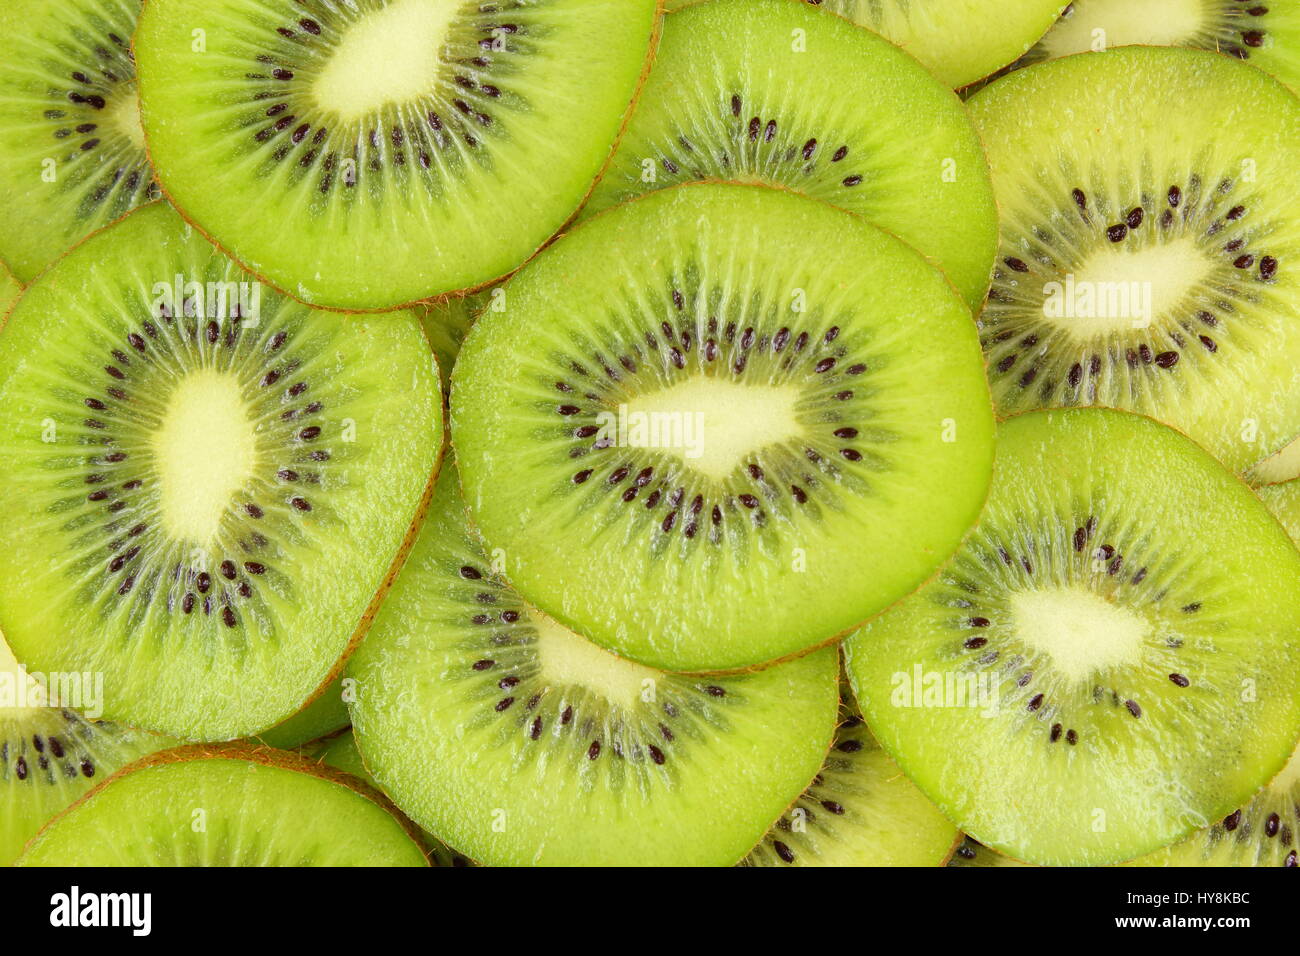 slices of fresh green kiwi fruits as a food background texture Stock Photo